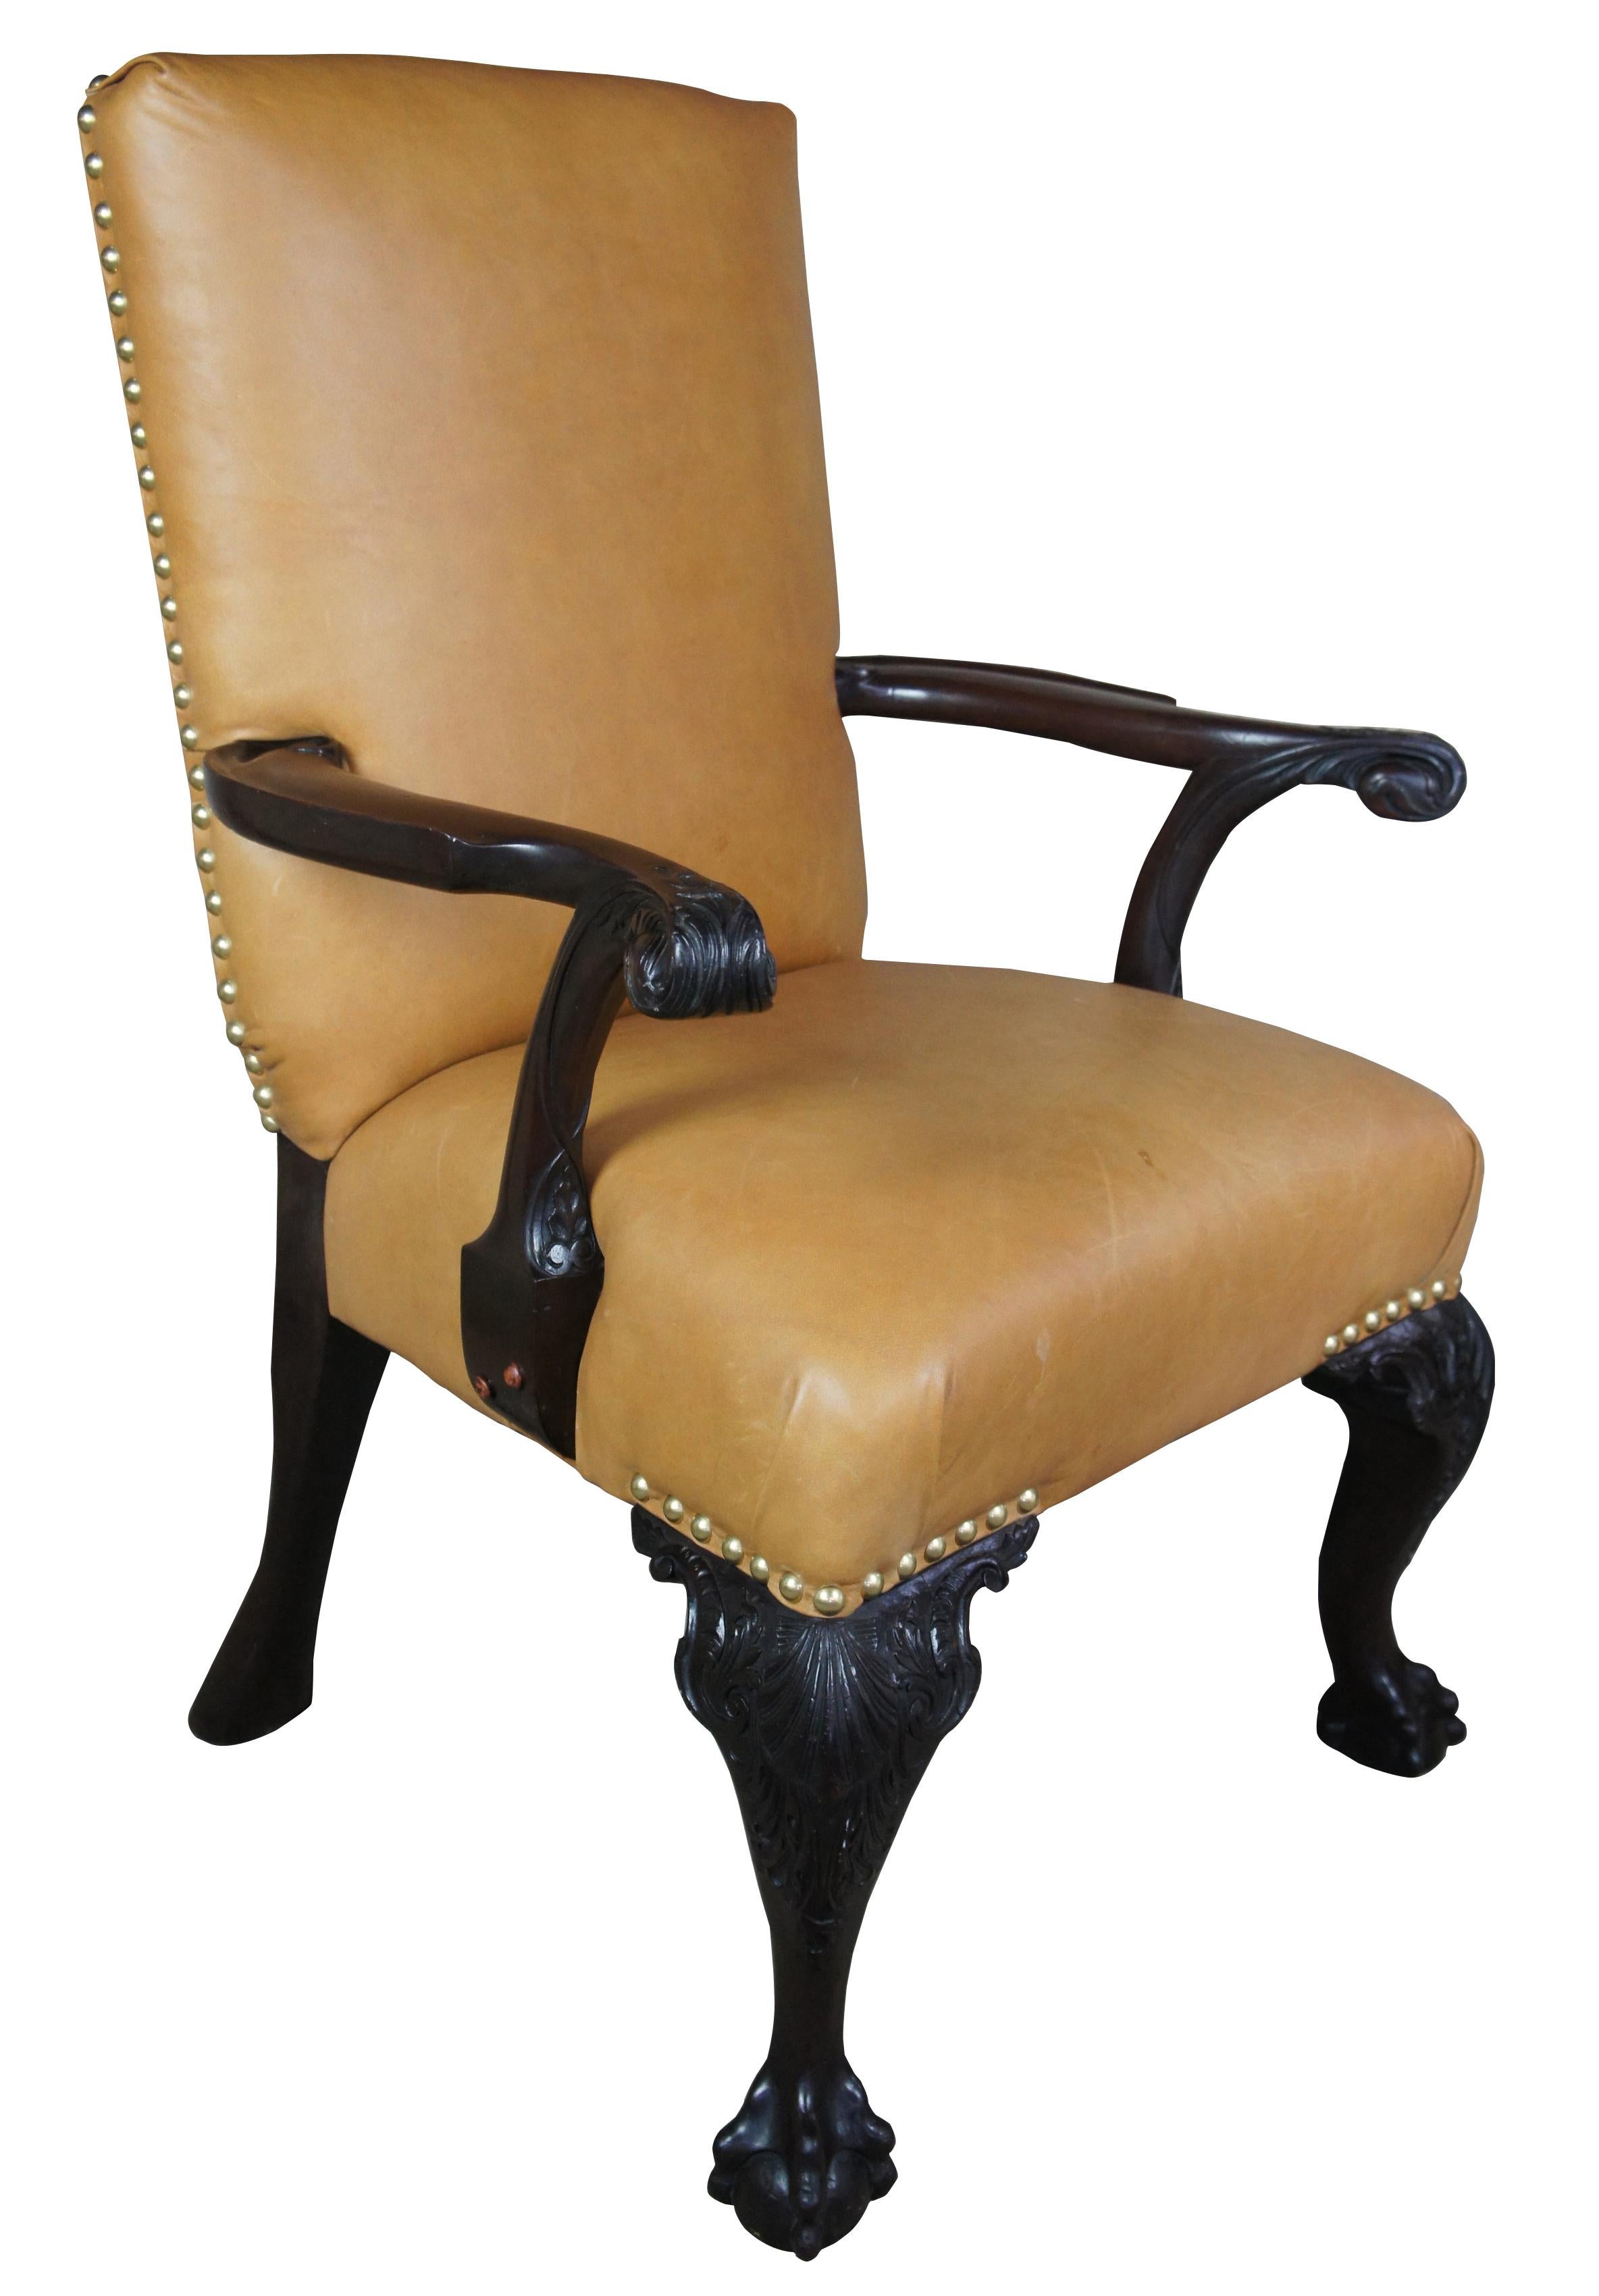 Antique 19th century English Chippendale armchair carved mahogany leather ball claw

A beautiful heavy english Chippendale style arm chair. Made from mahogany with tan leather and nailhead trim. Heavily carved with cabriole legs and ball and claw